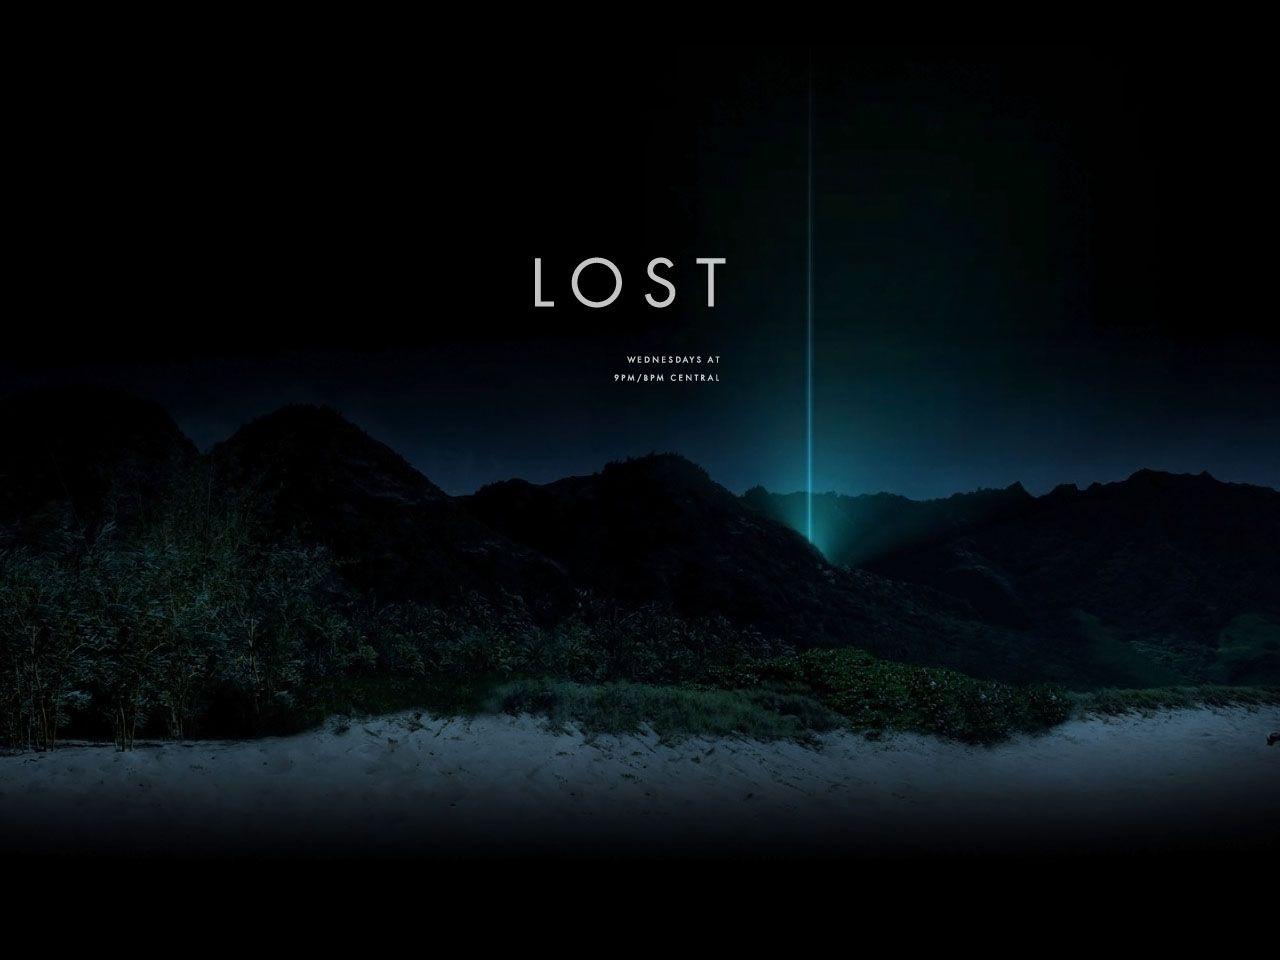 Lost image the lost HD wallpaper and background photo